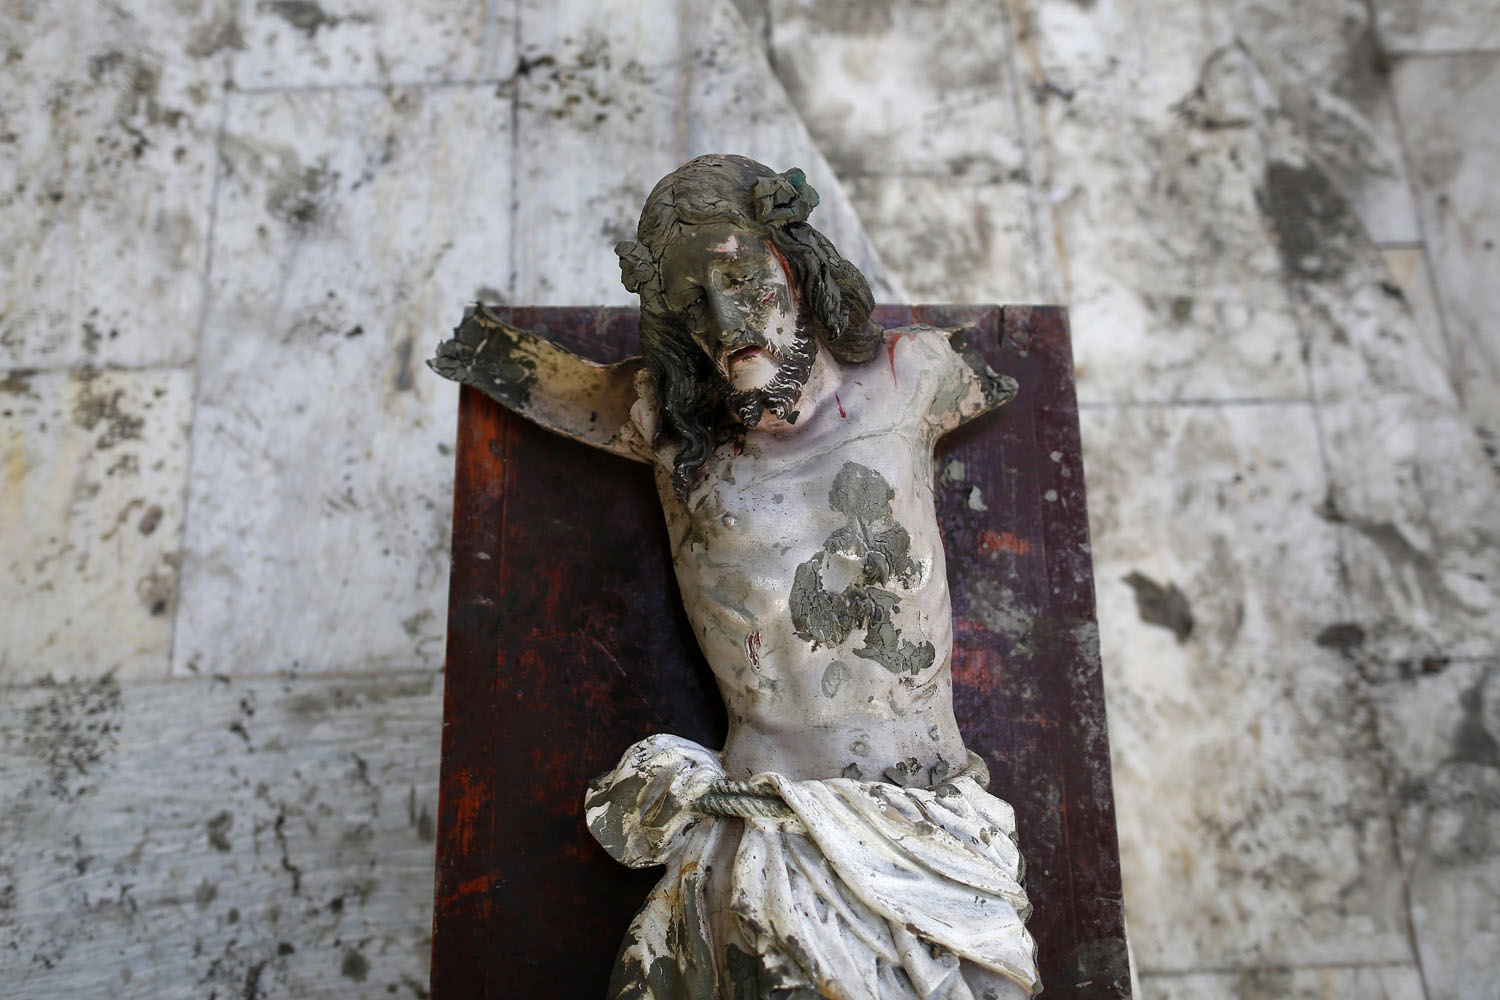 Nov. 21, 2013. A damaged statue of Jesus Christ that was recovered from rubble is placed in a church in an area wrecked by Typhoon Haiyan in Tacloban, Philippines.